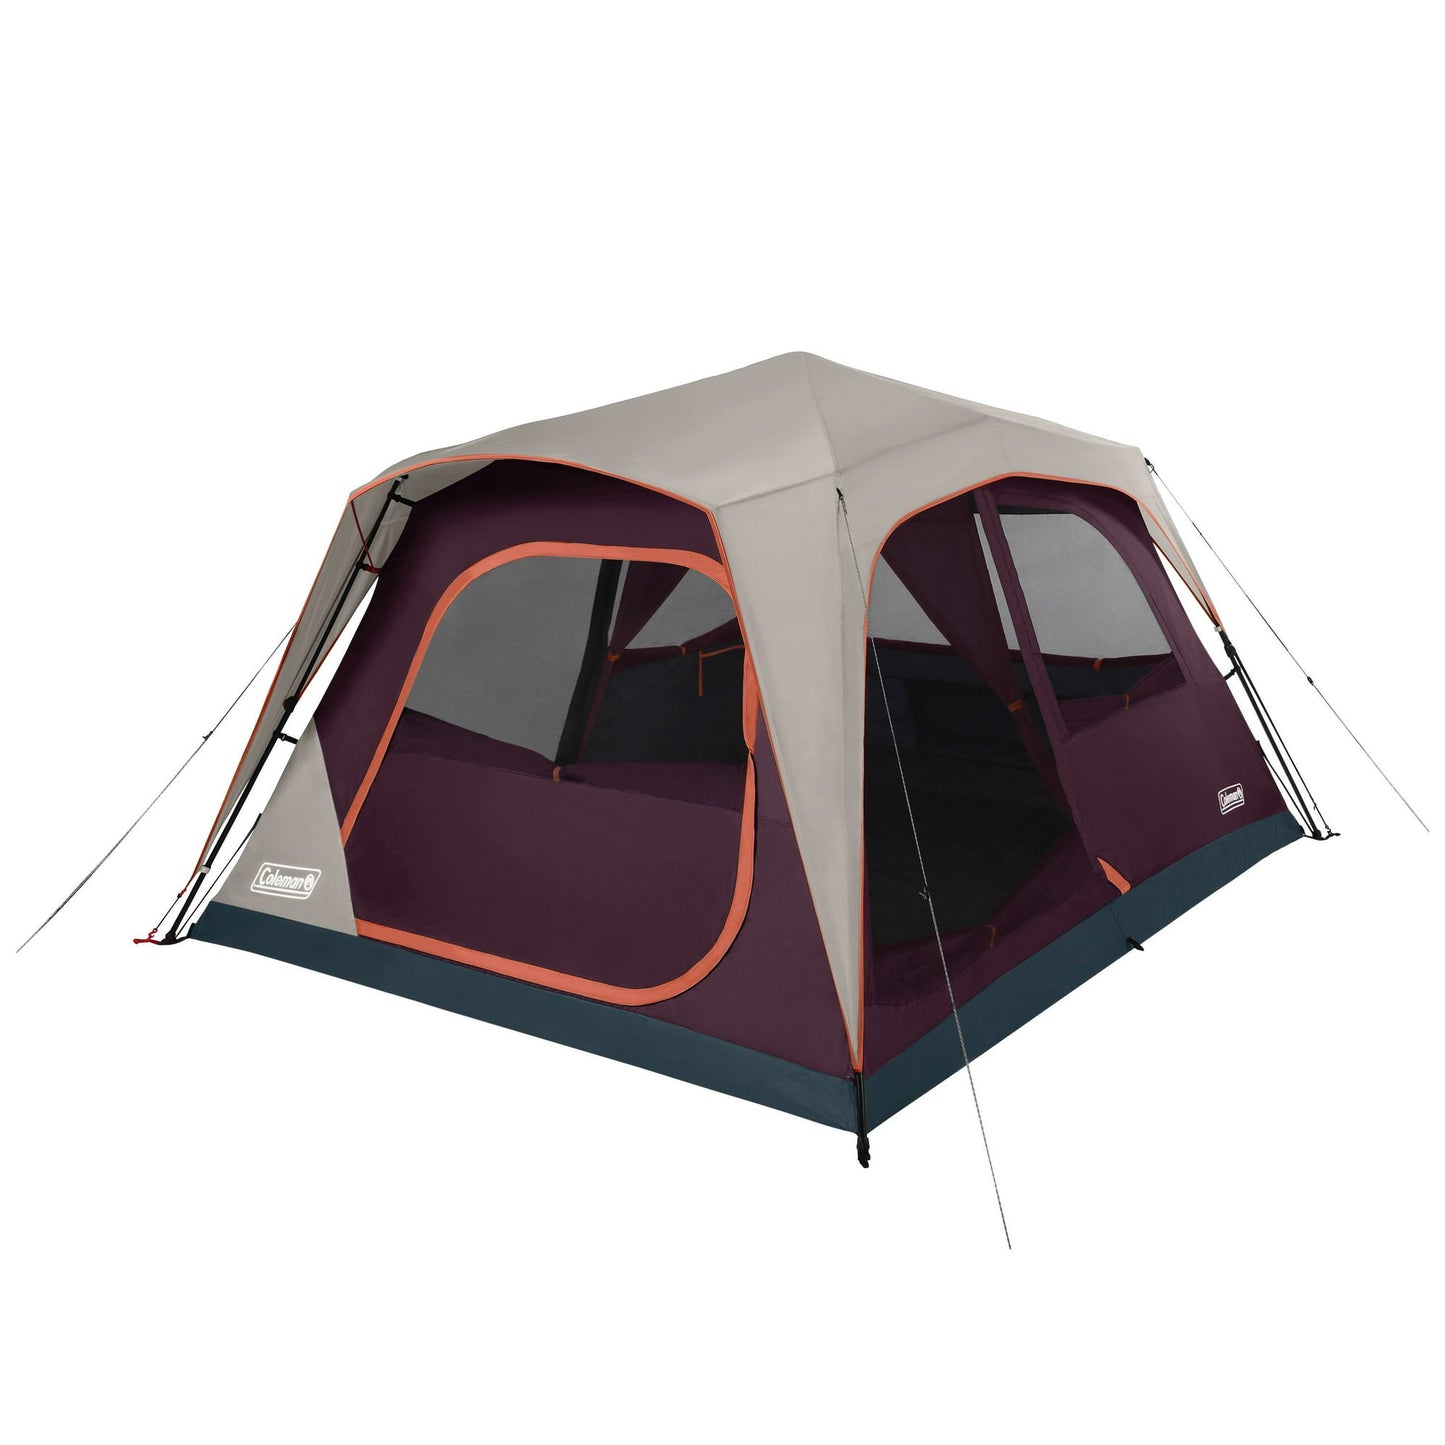 Skylodge 8-Person Instant Camping Tent, Blackberry